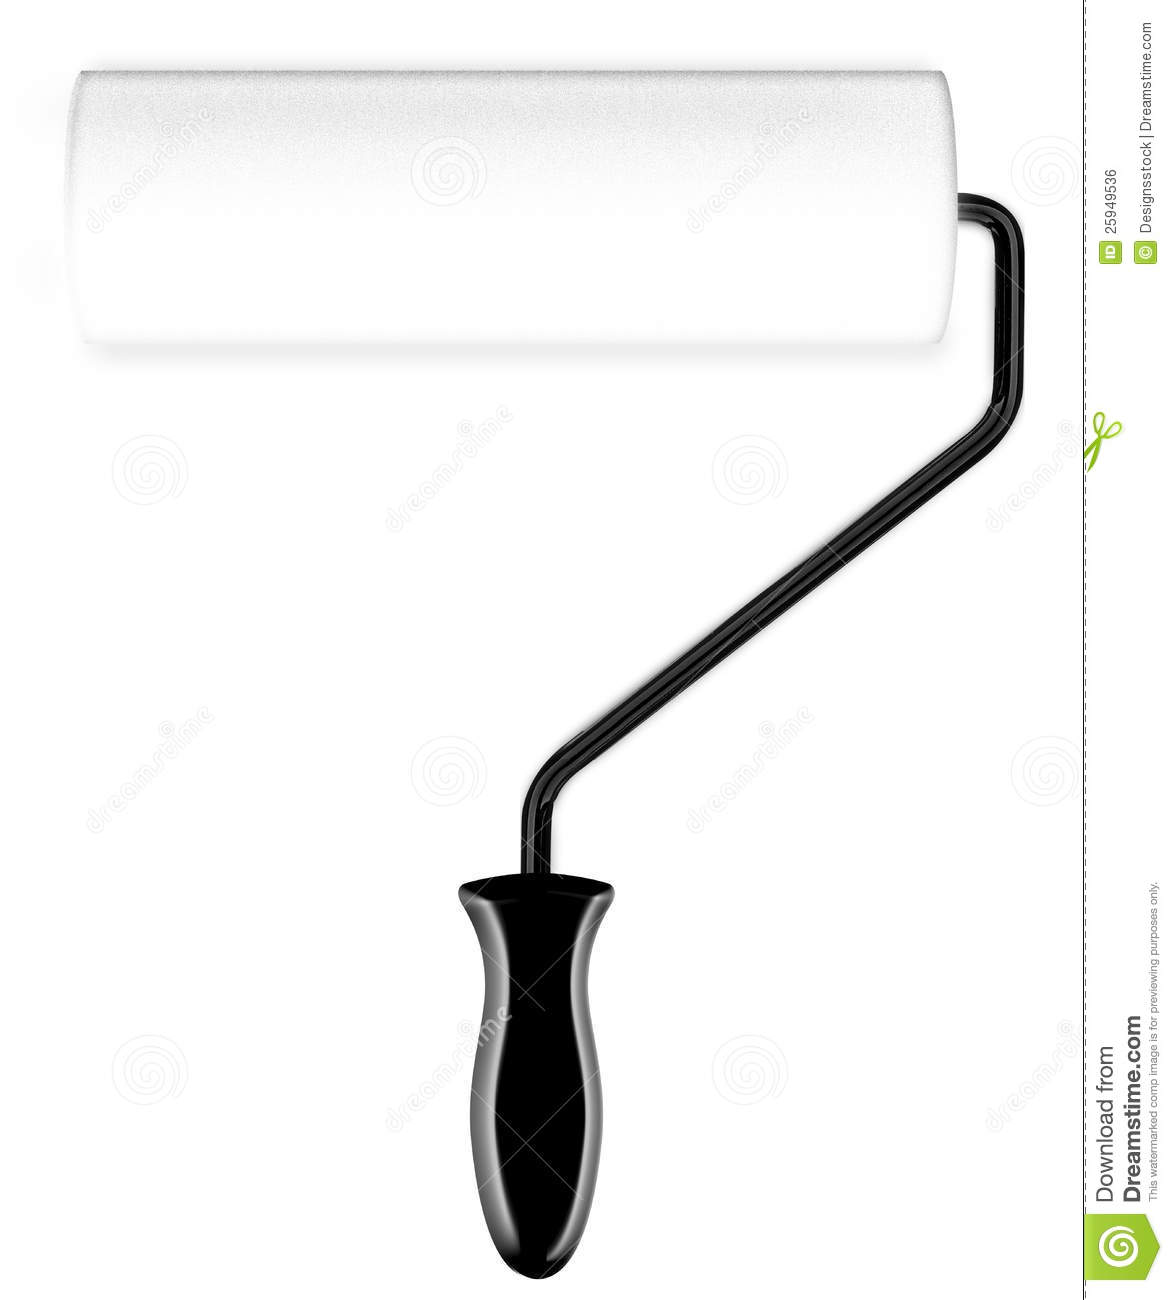 Paint roller clipart black and white.